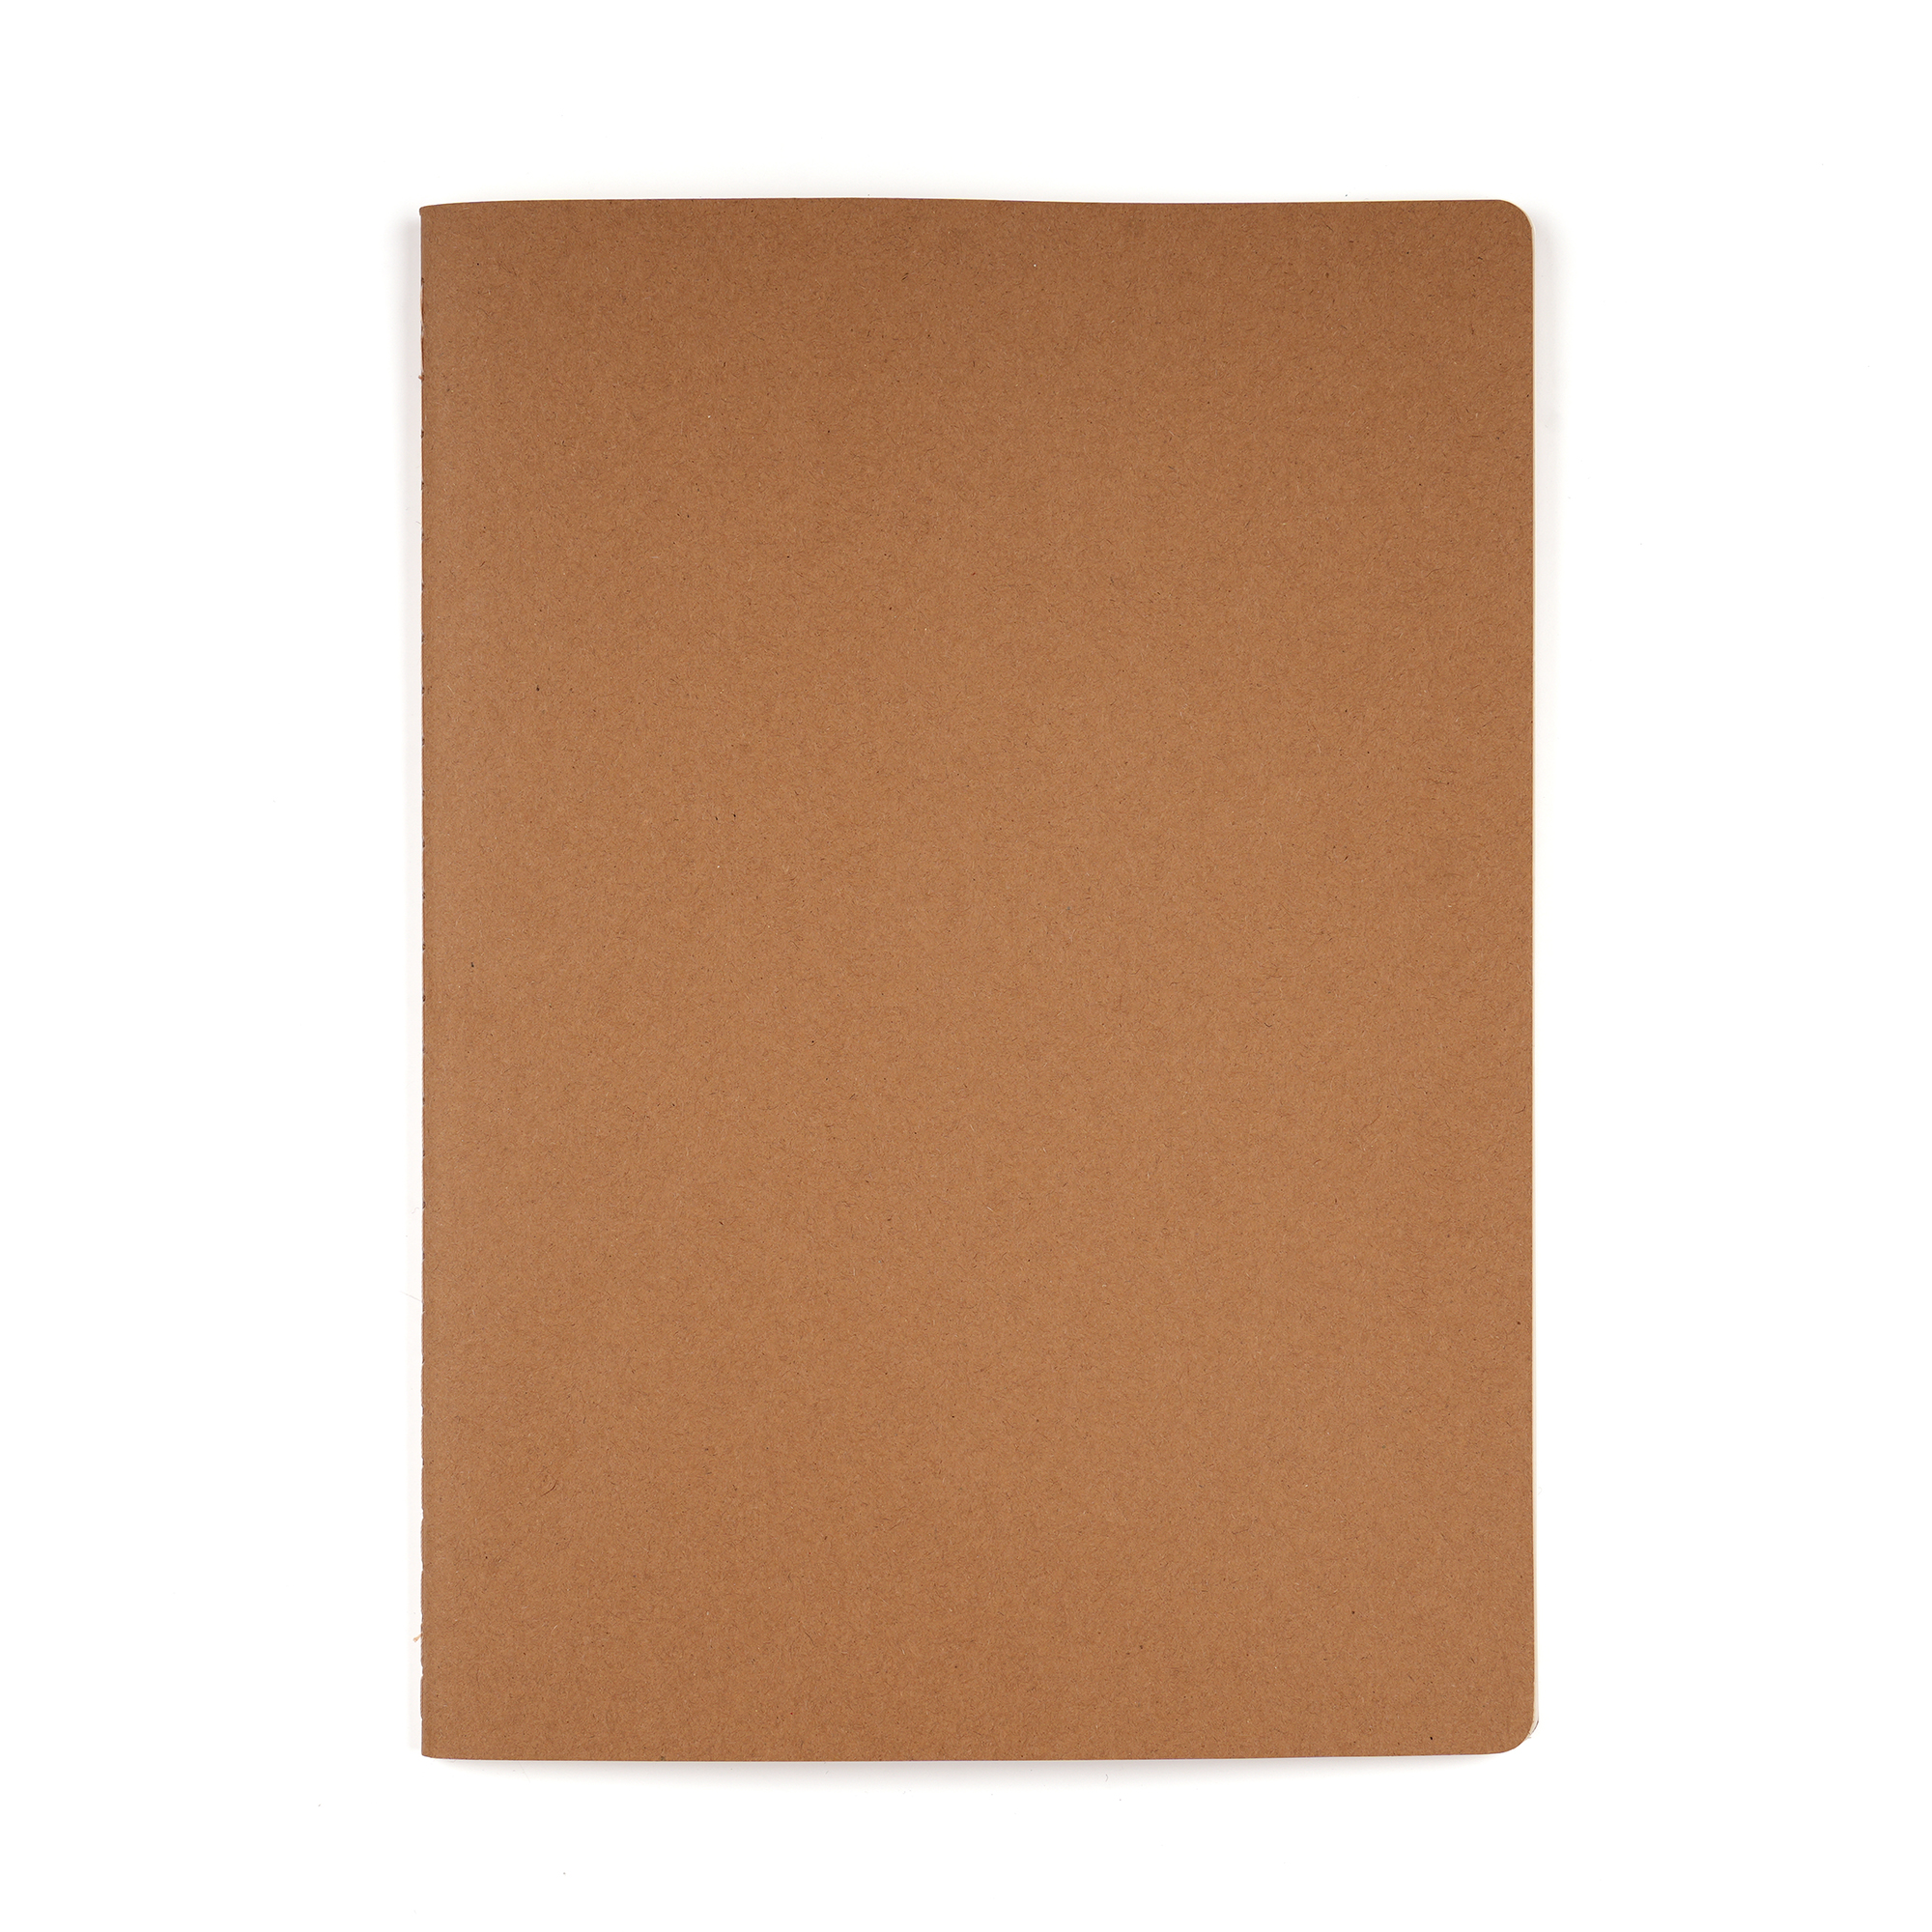 QS0018 3 - A5 Hardcover Leather Notebook